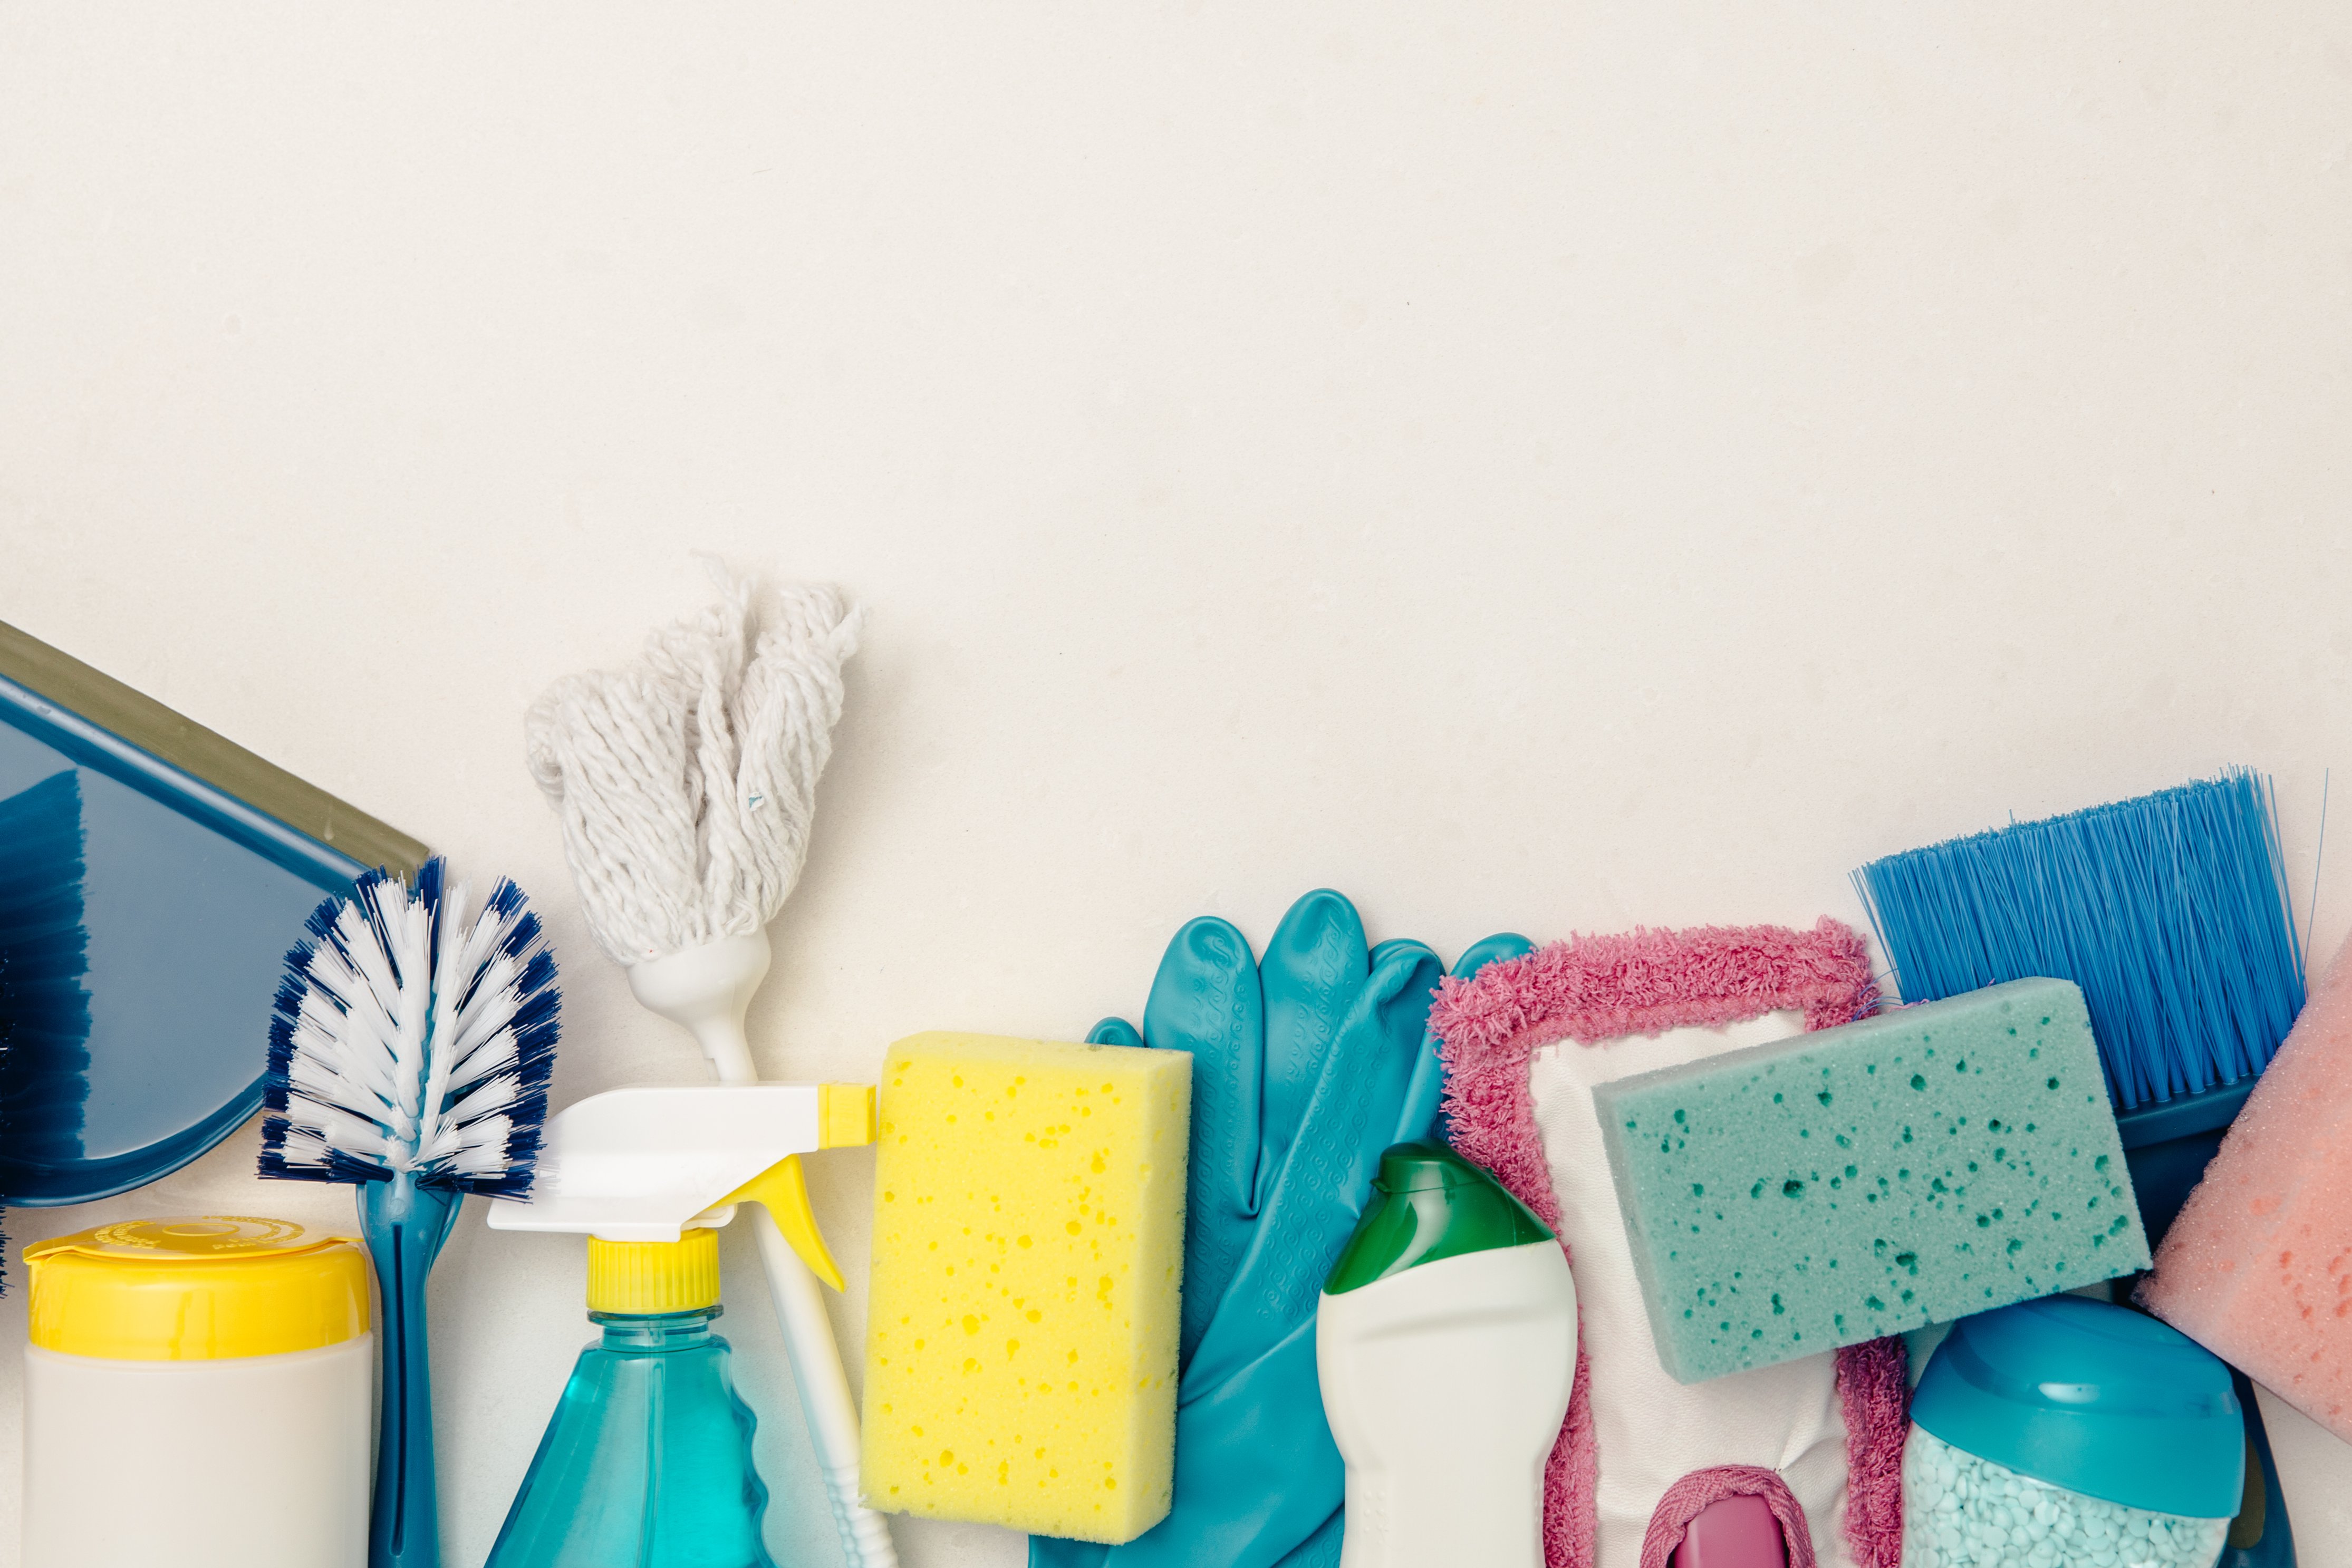 Yorba Linda Cleaning Services